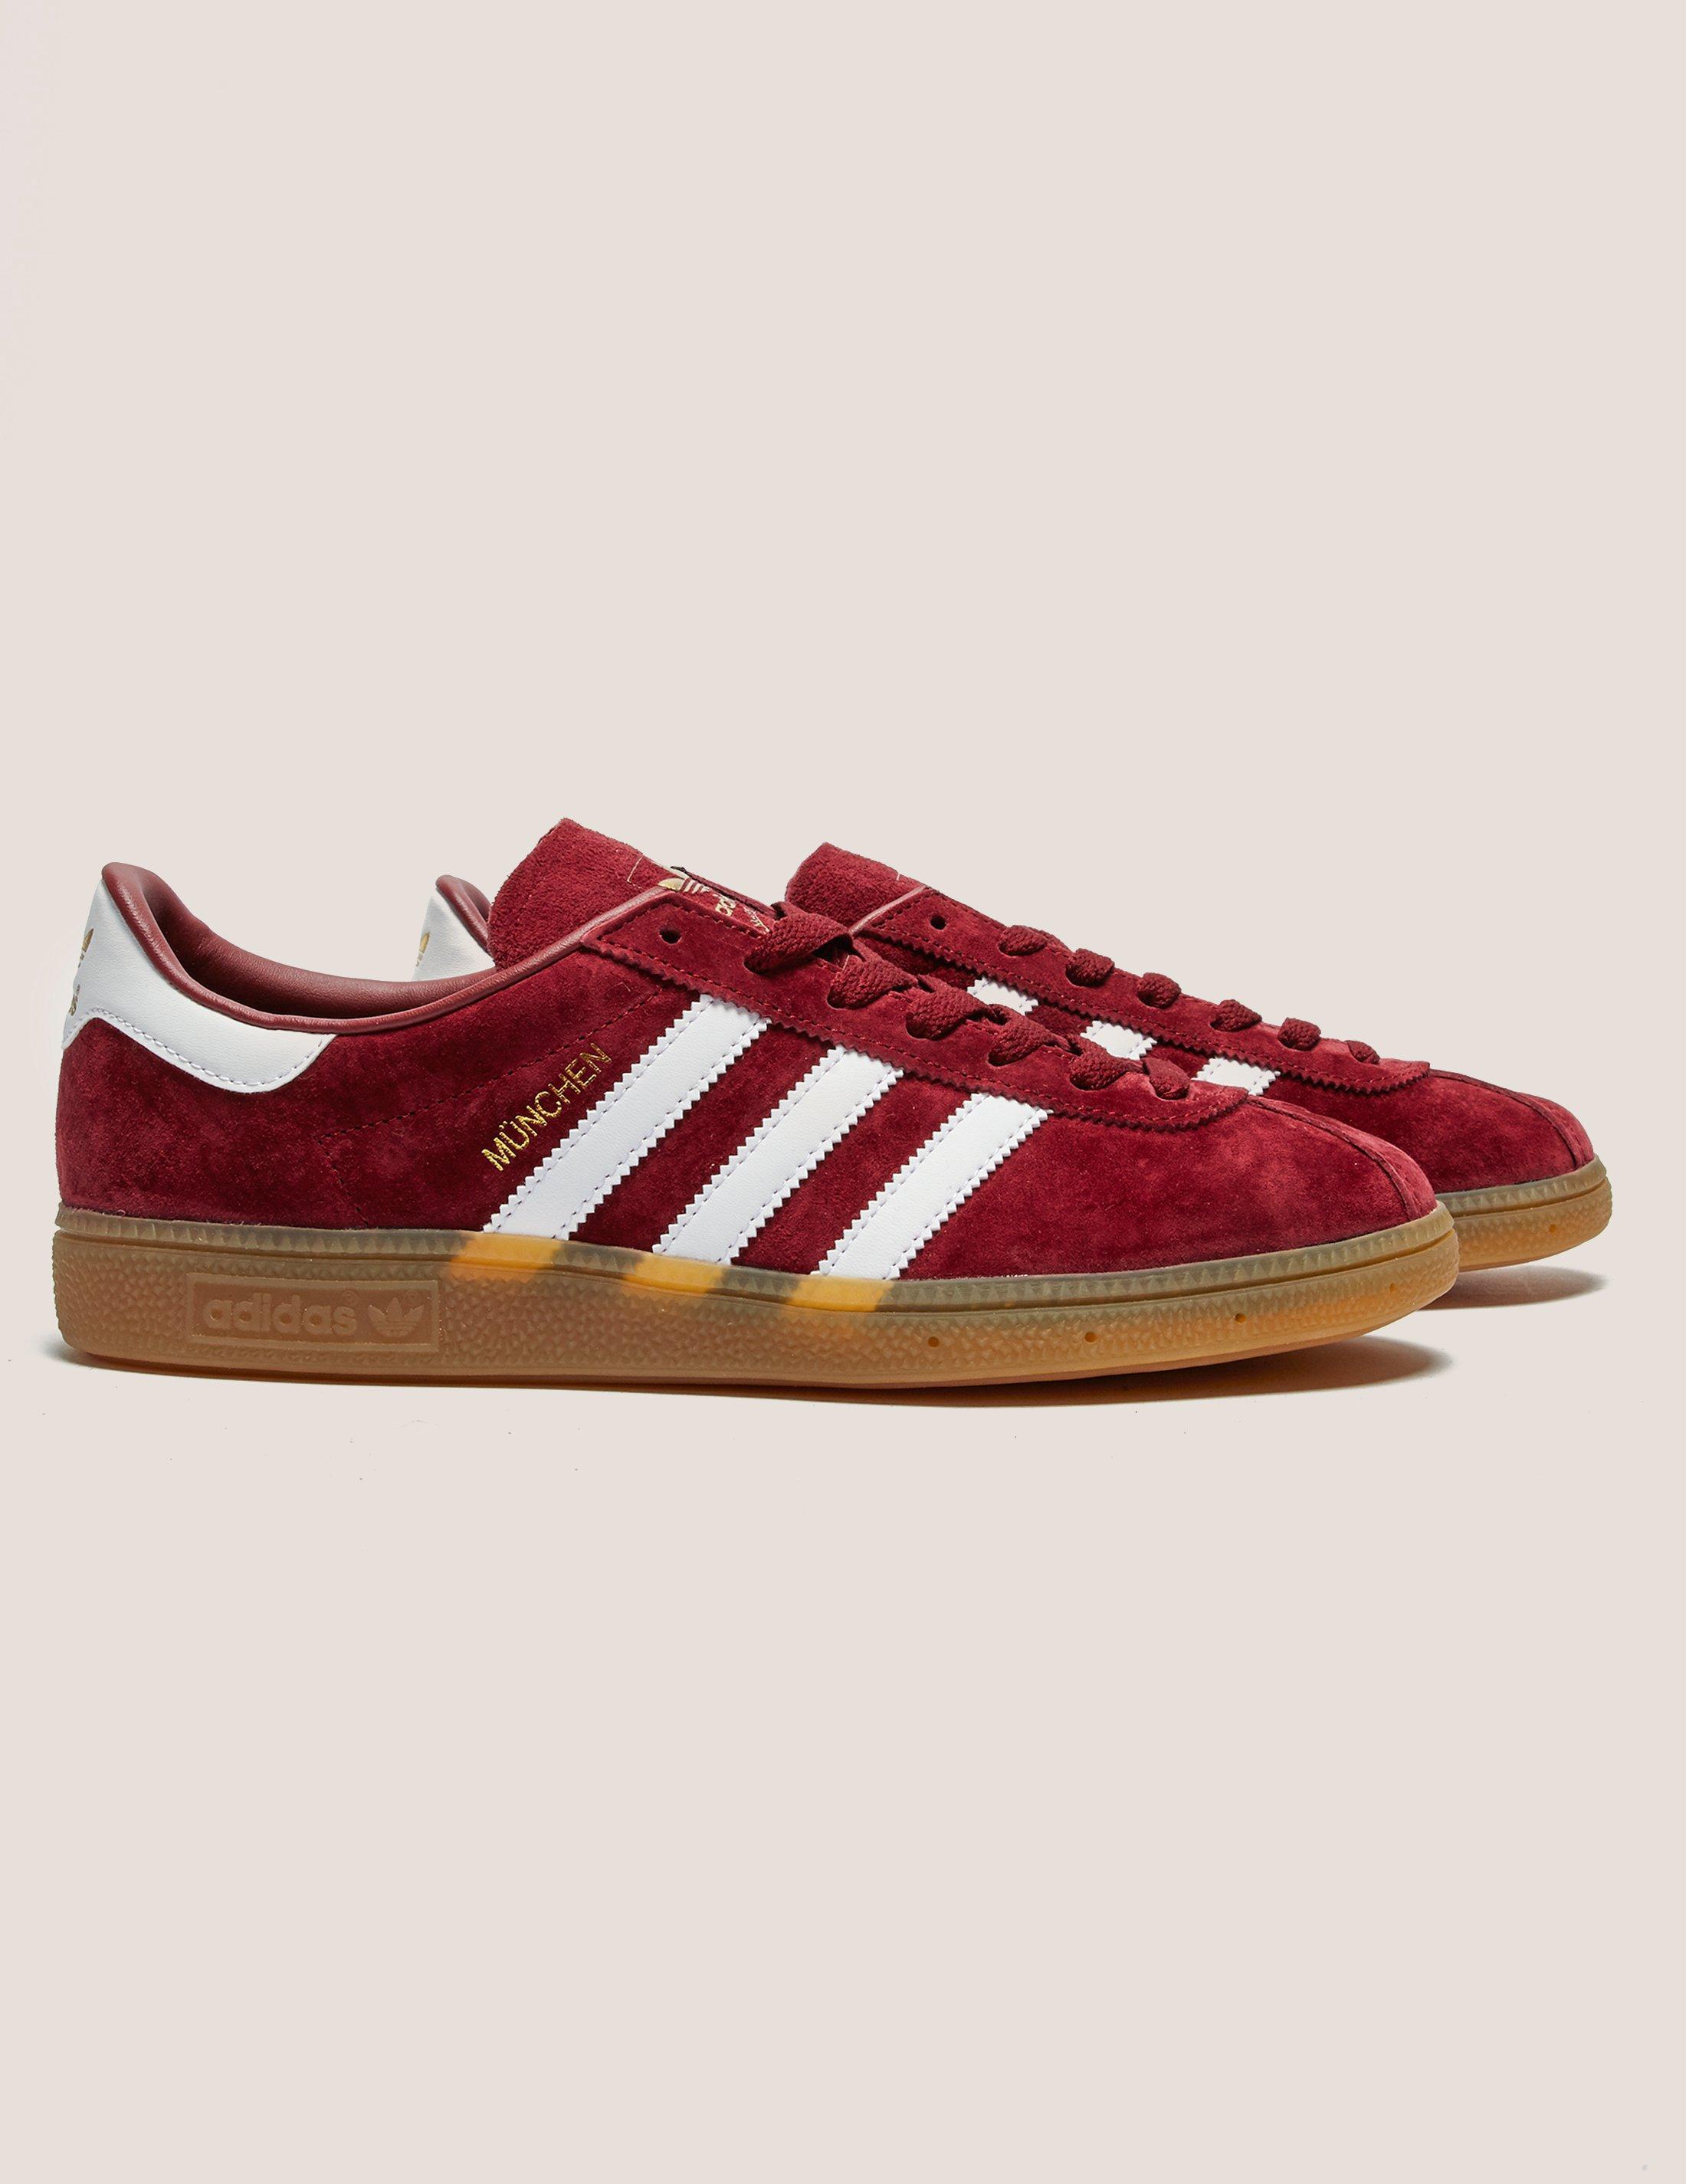 adidas Leather Munchen in Burgundy (Red) for Men - Lyst